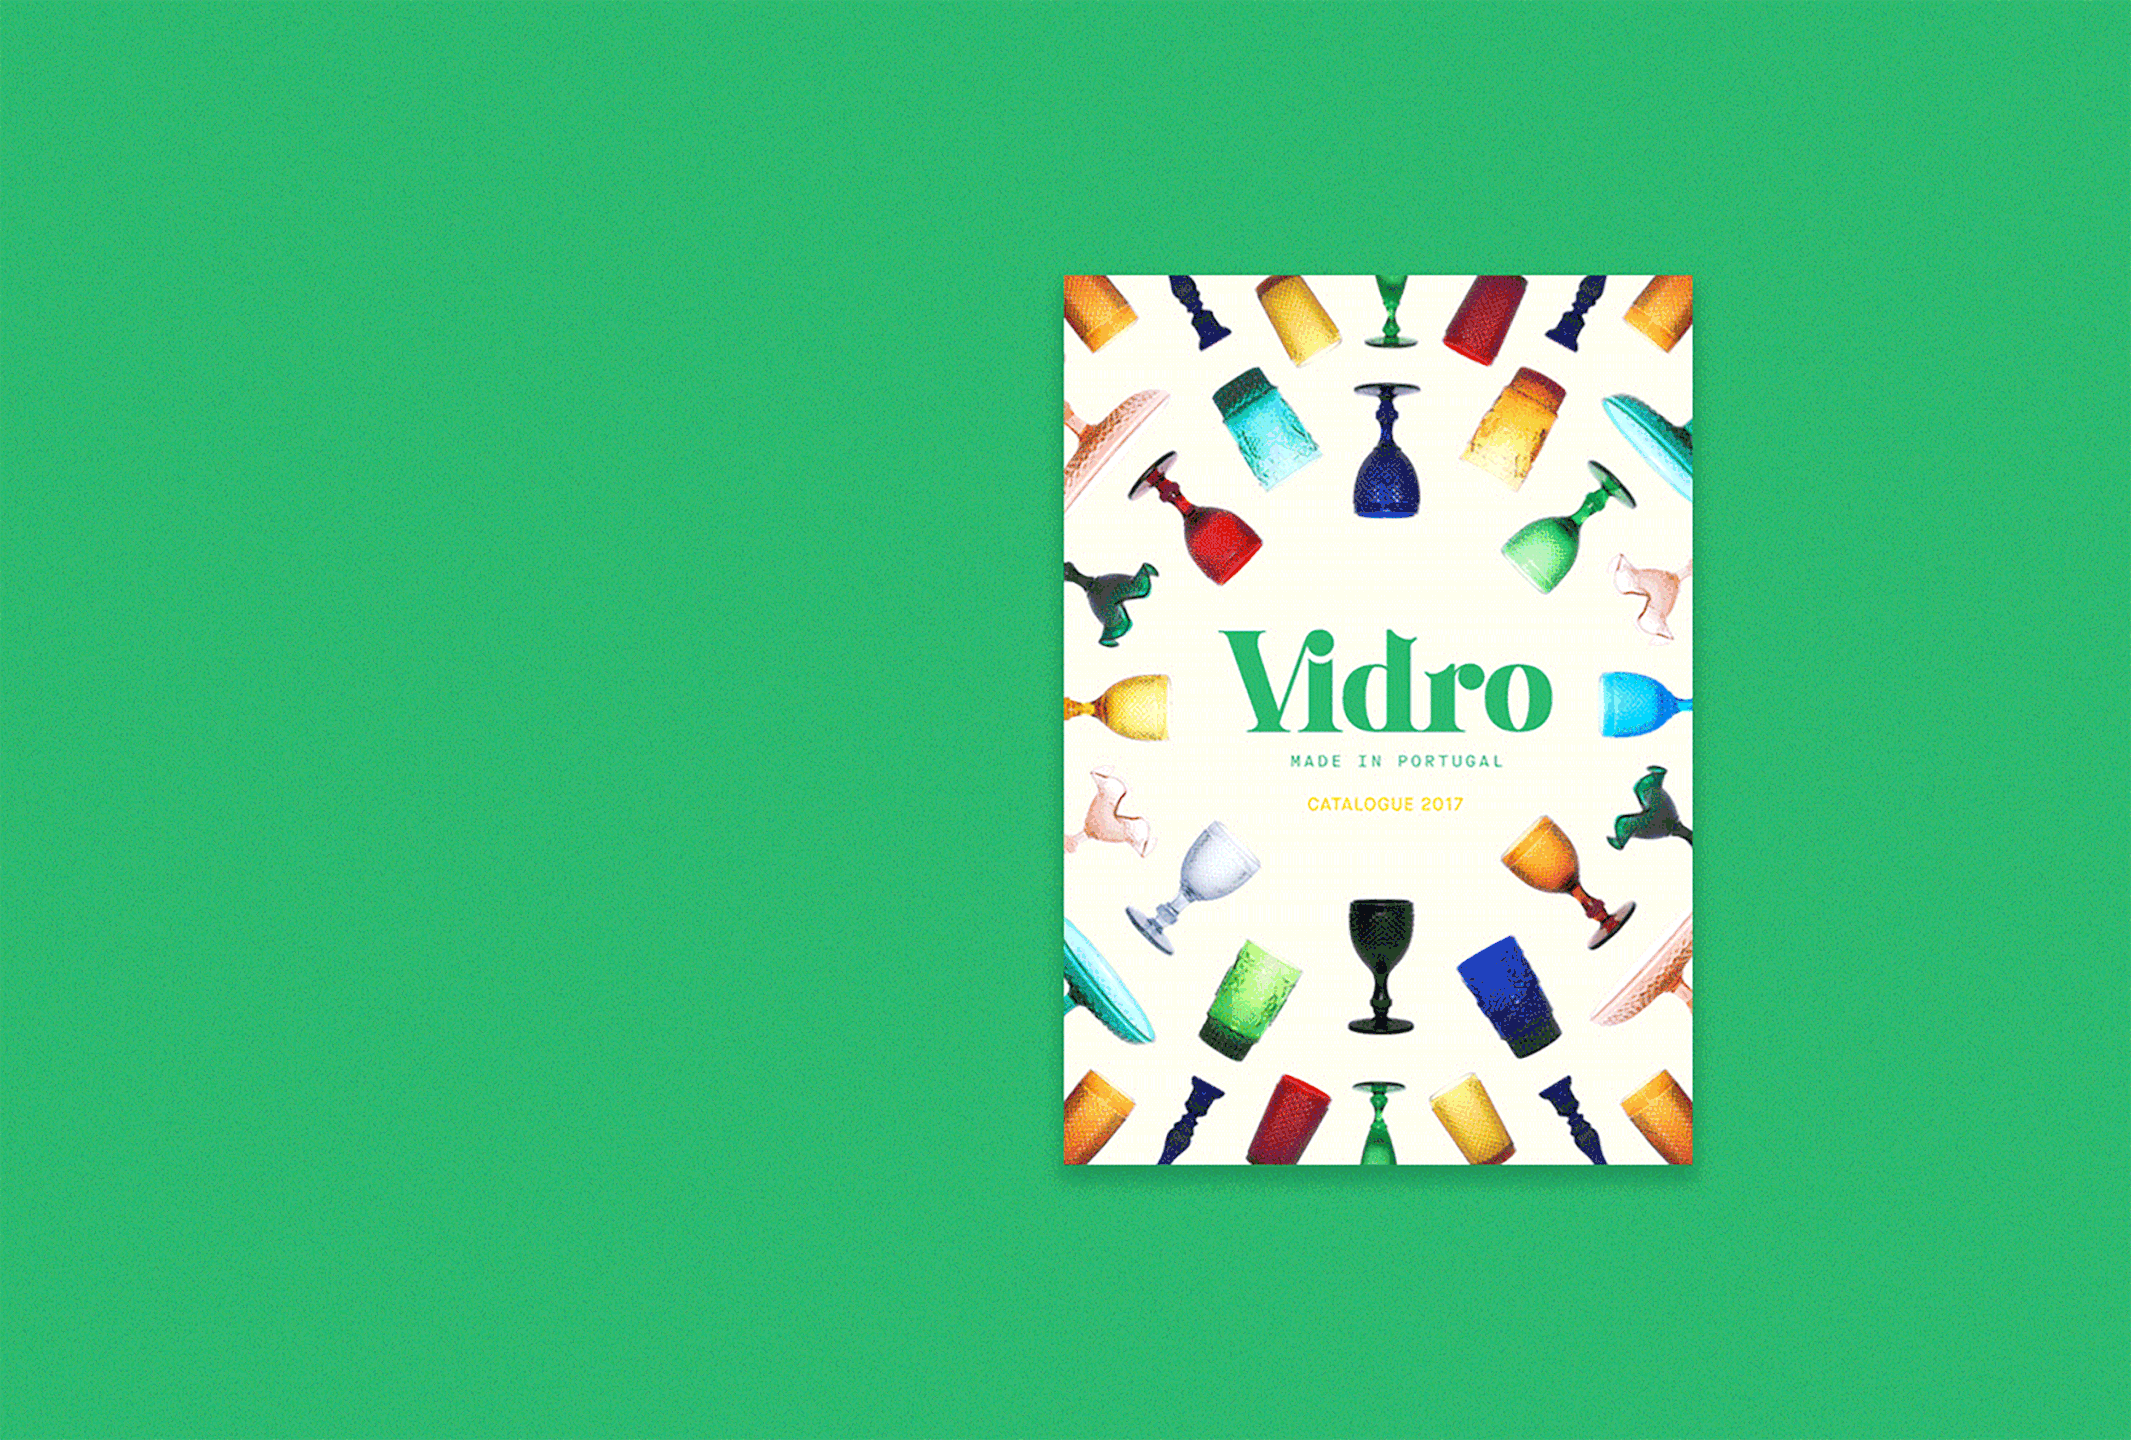 An animation of the catalogue design and layout for Portuguese glassware brand Vidro